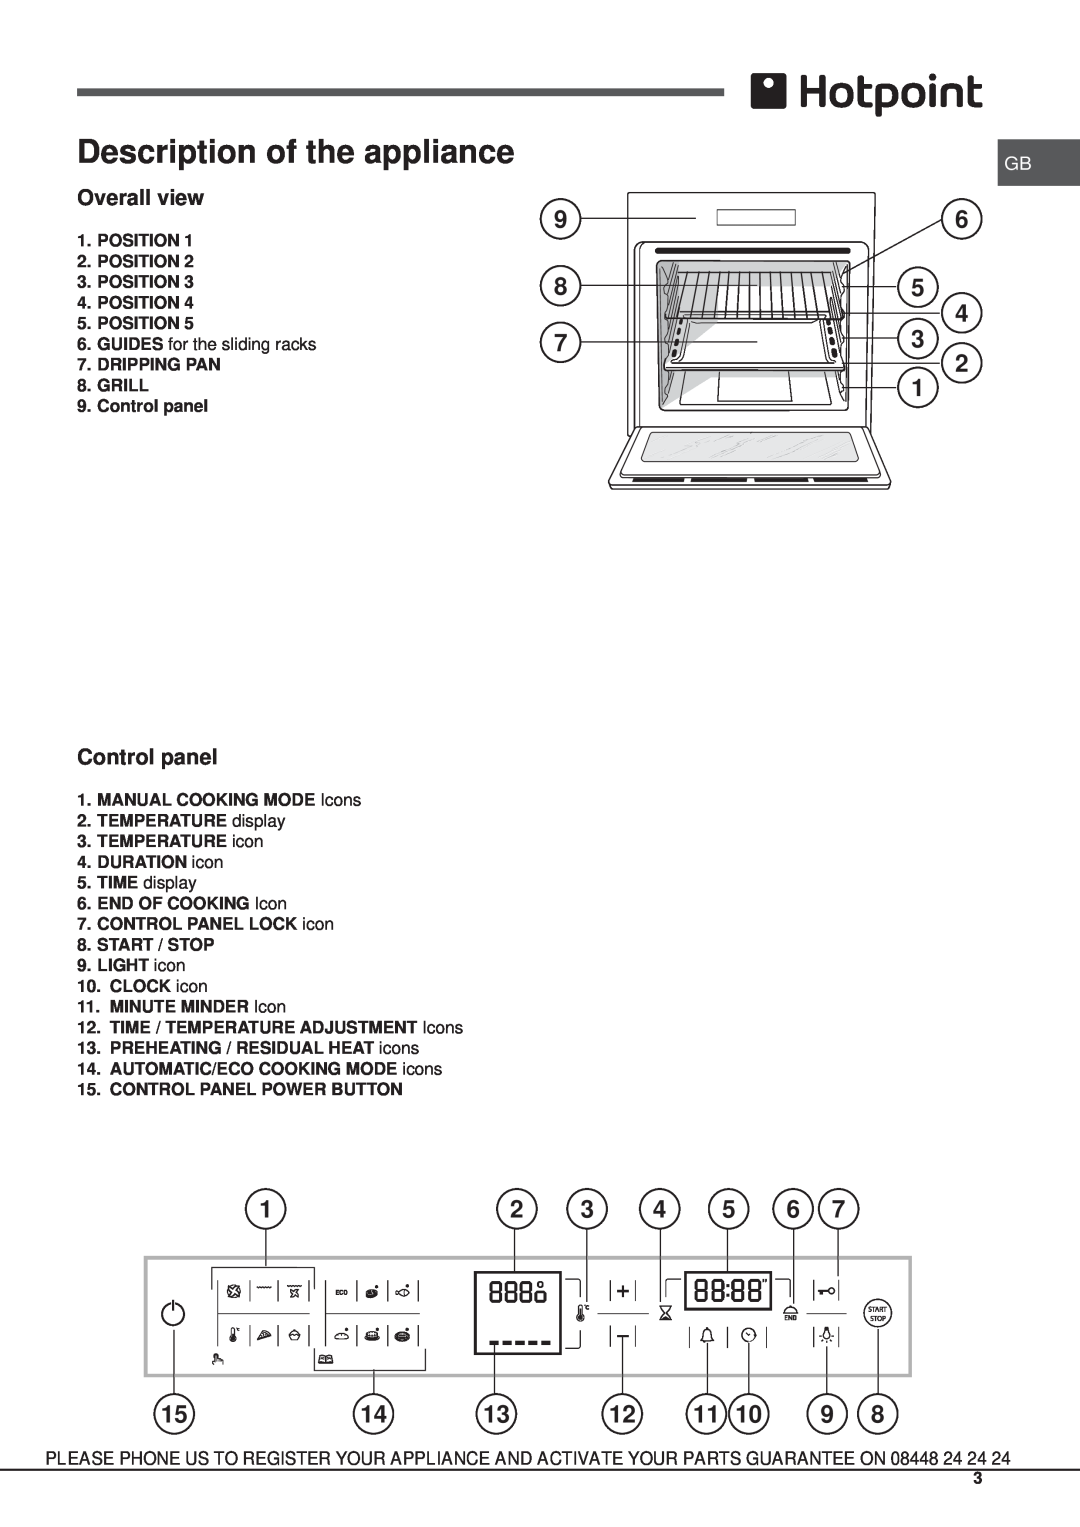 Hotpoint SH 108 CX S manual Description of the appliance, Overall view, Control panel 